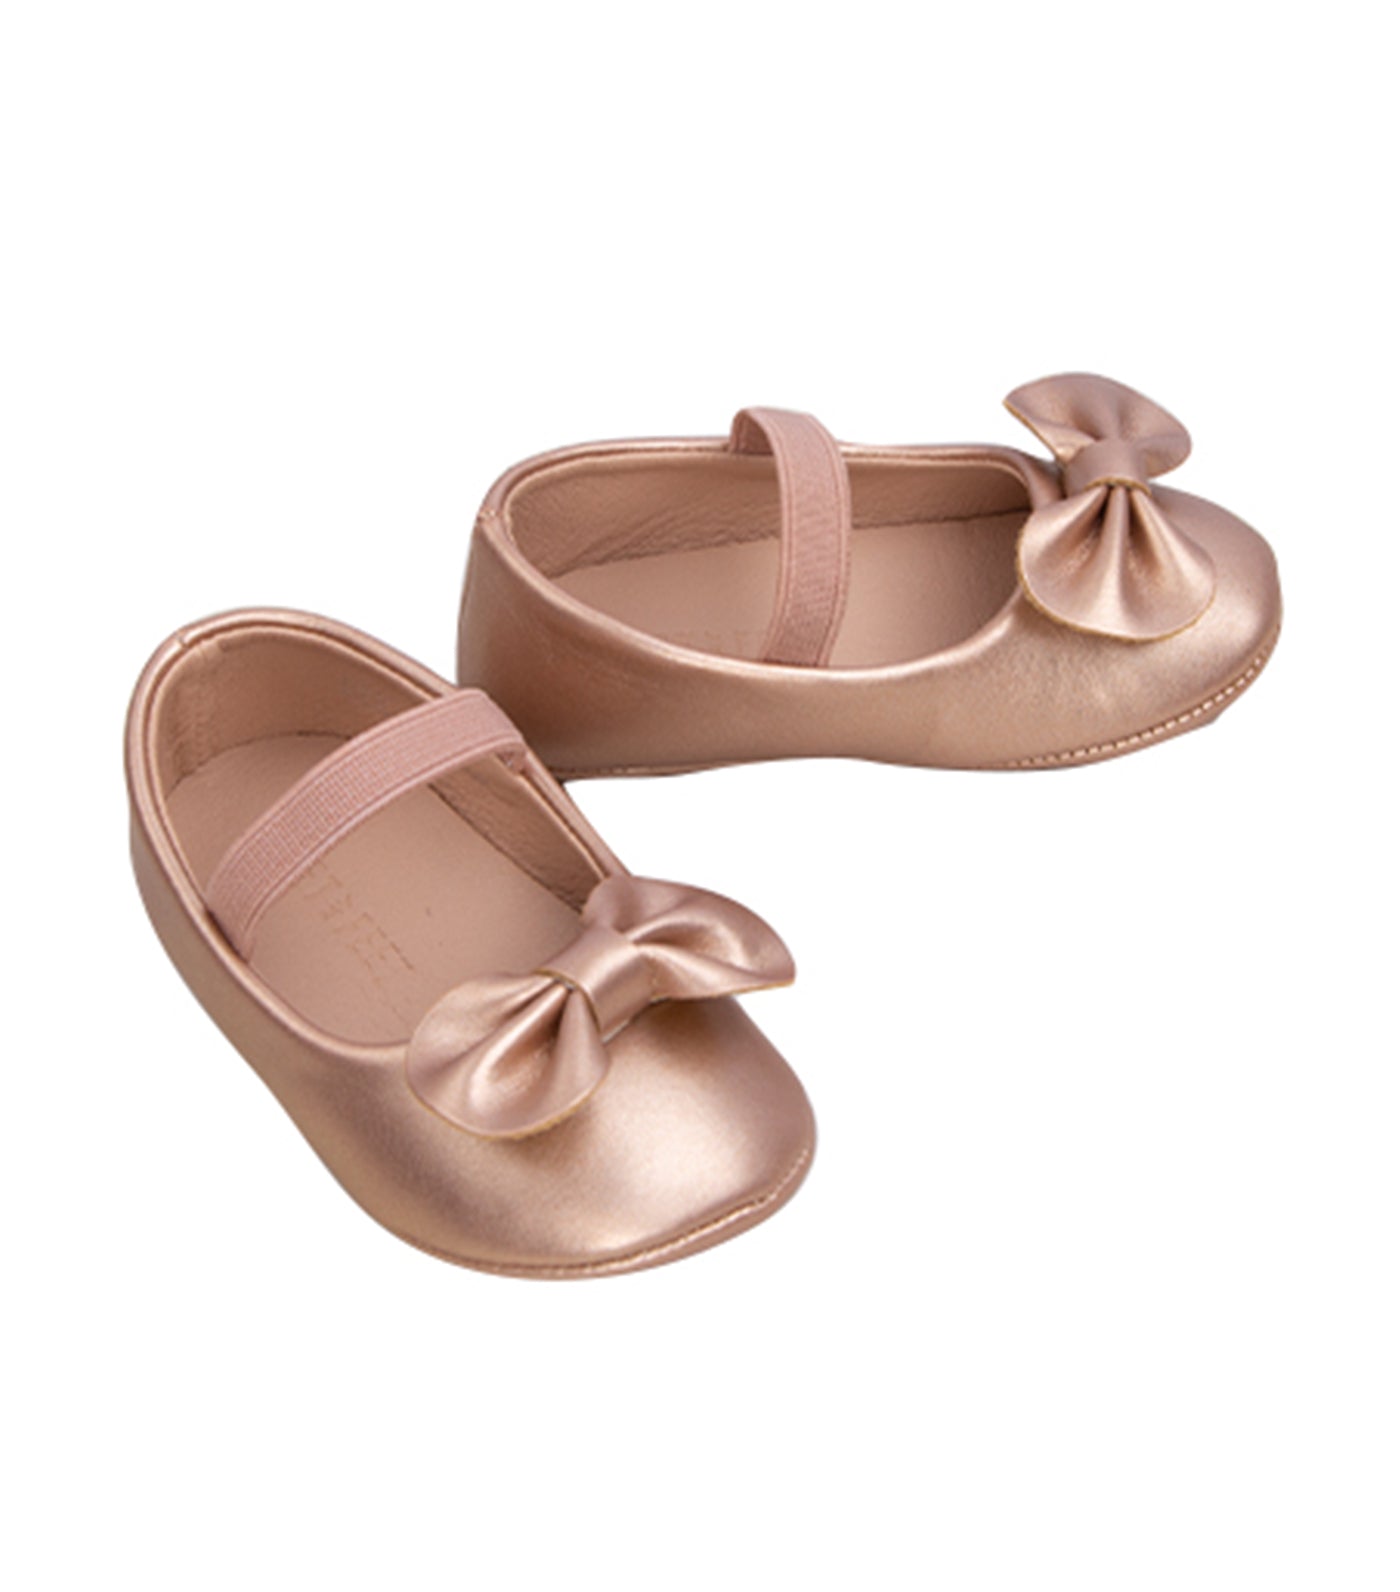 Bee 2 Mary Janes for Toddler Girls - Rosegold